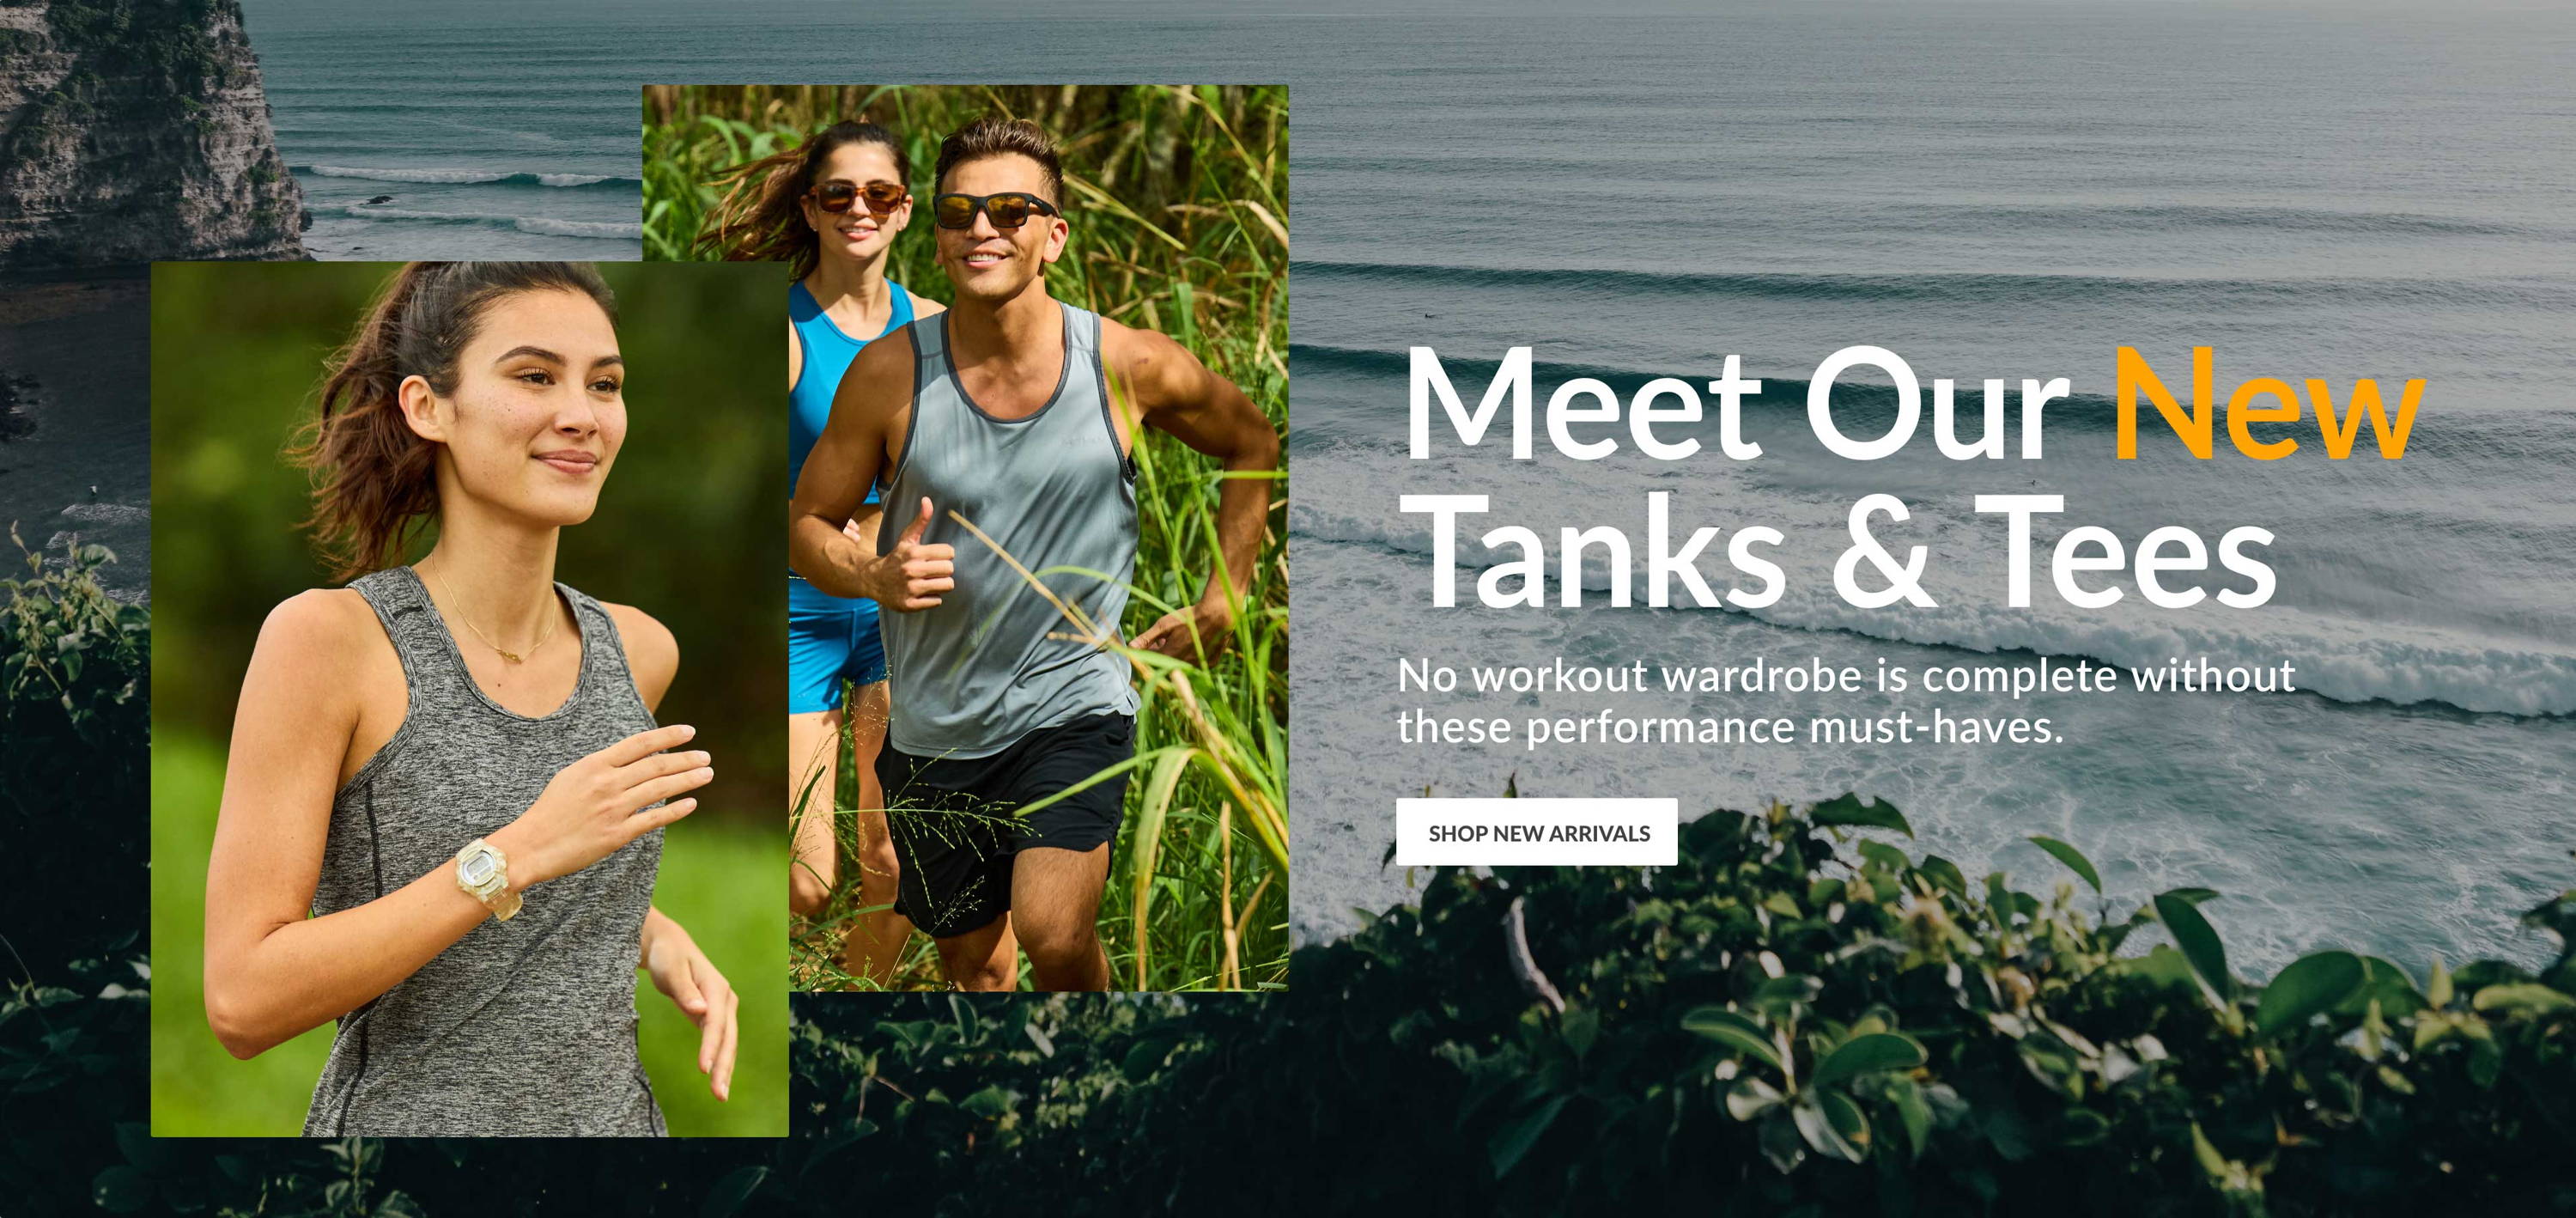 Meet Our New Tanks & Tees - No workout wardrobe is complete withouth these performance must-haves - SHOP NEW ARRIVALS